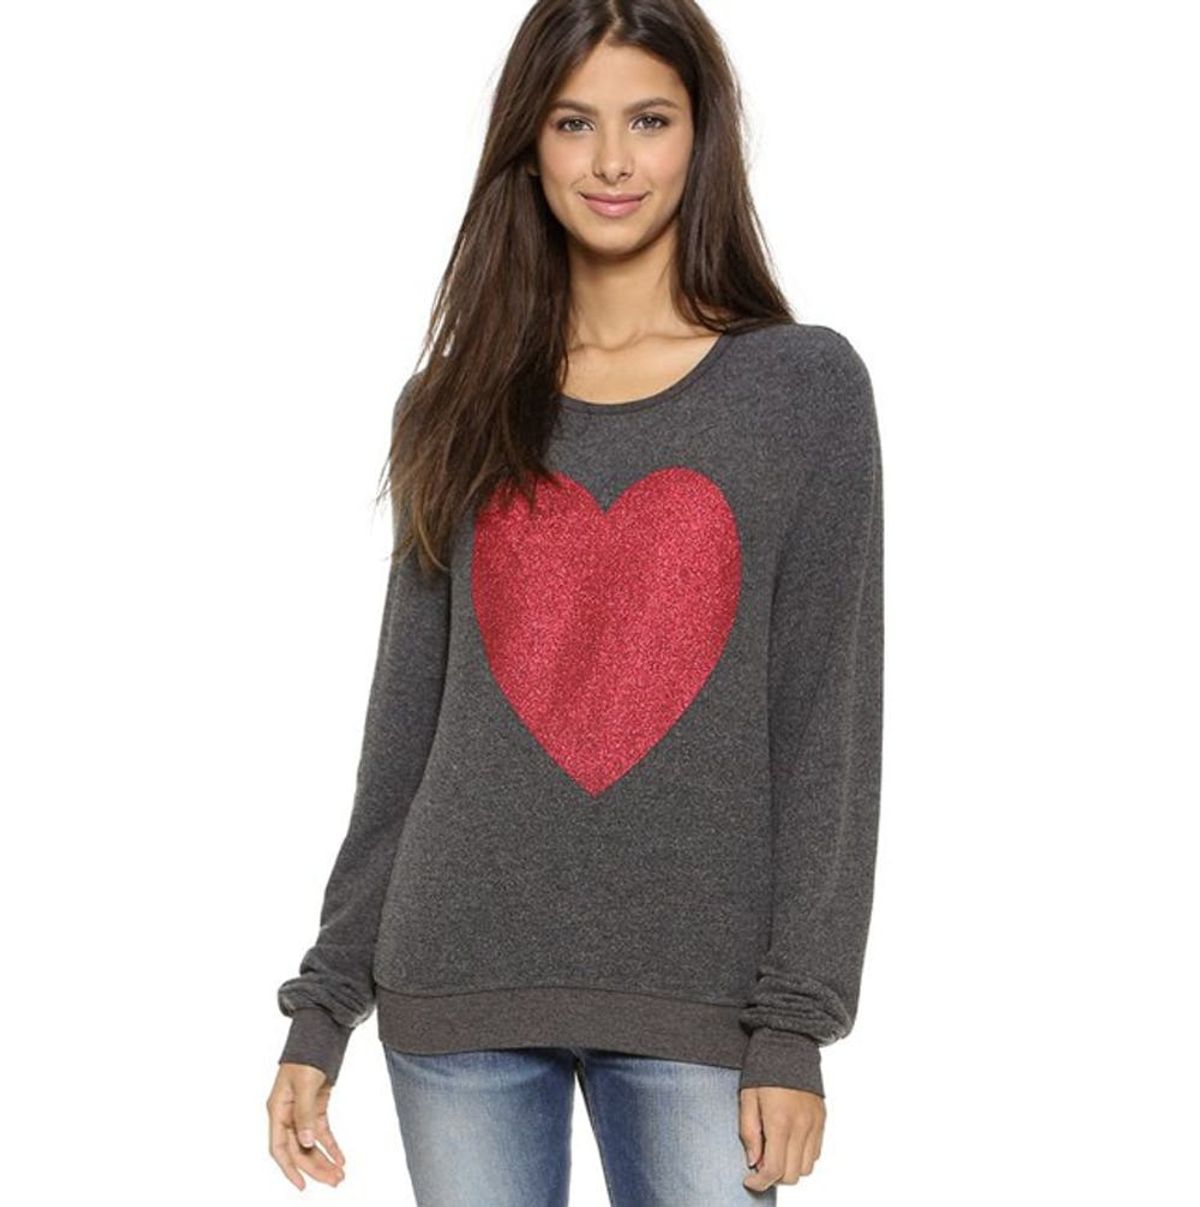 10 Heart-Printed Pieces You Can Totally Wear After Valentine’s Day